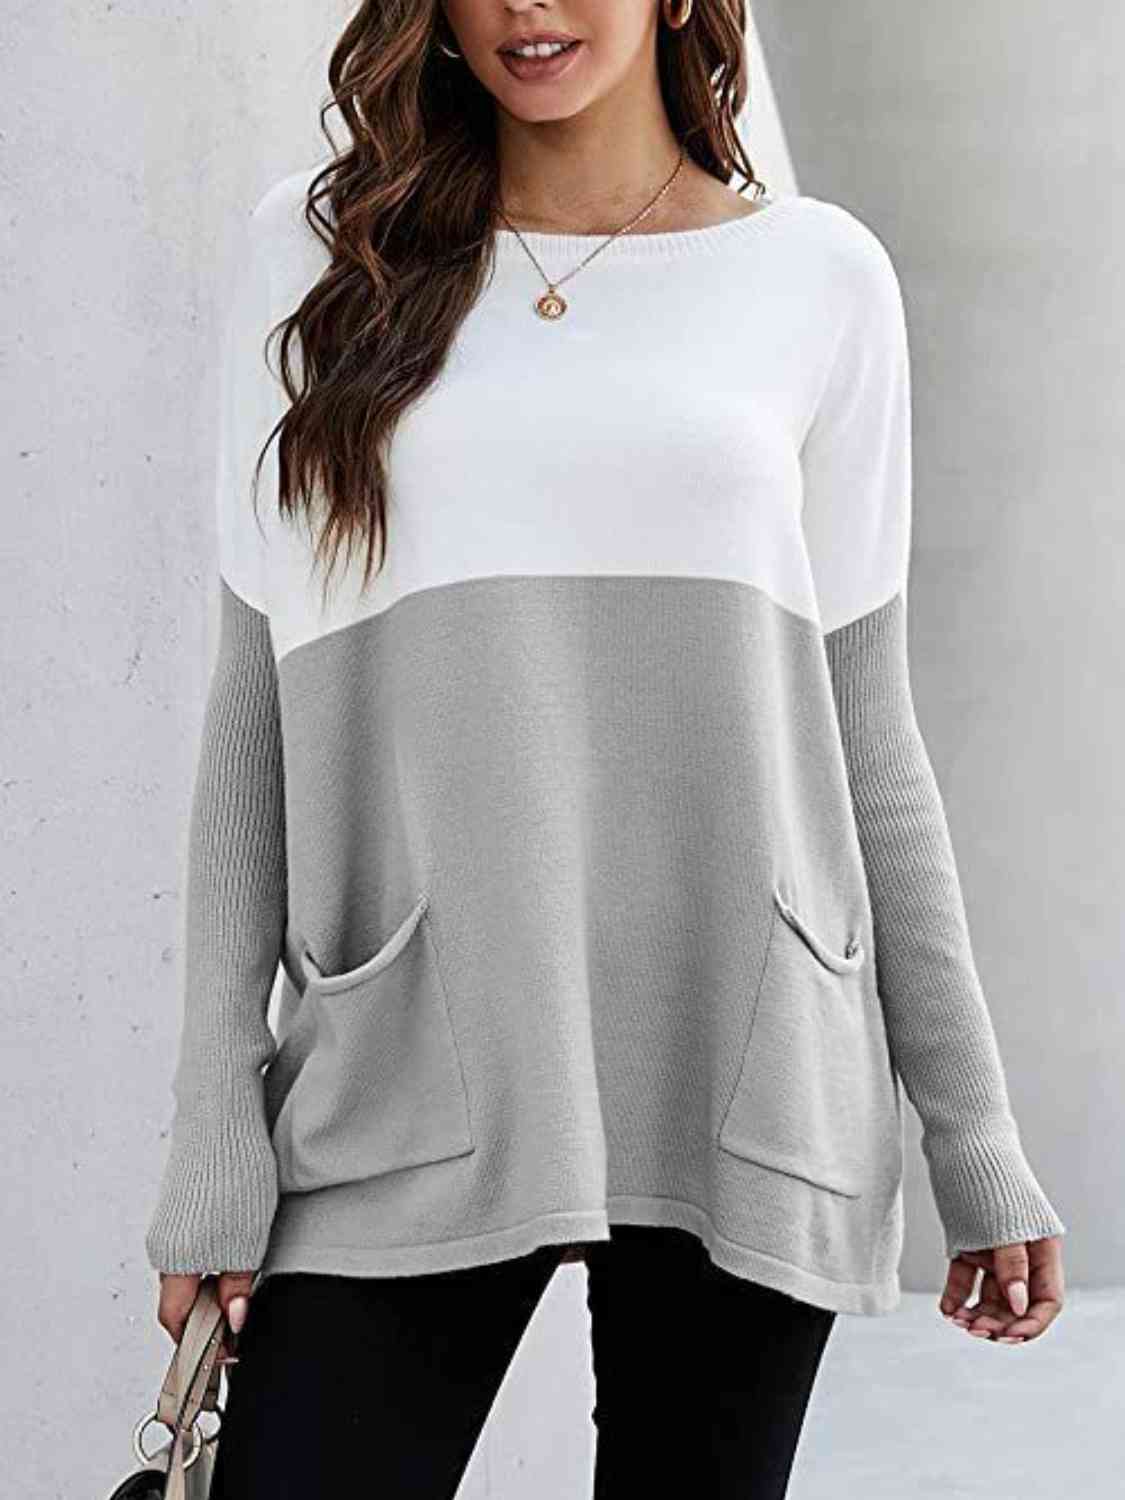 Two Tone Pullover Sweater with Pockets (7 Colors)  Krazy Heart Designs Boutique   